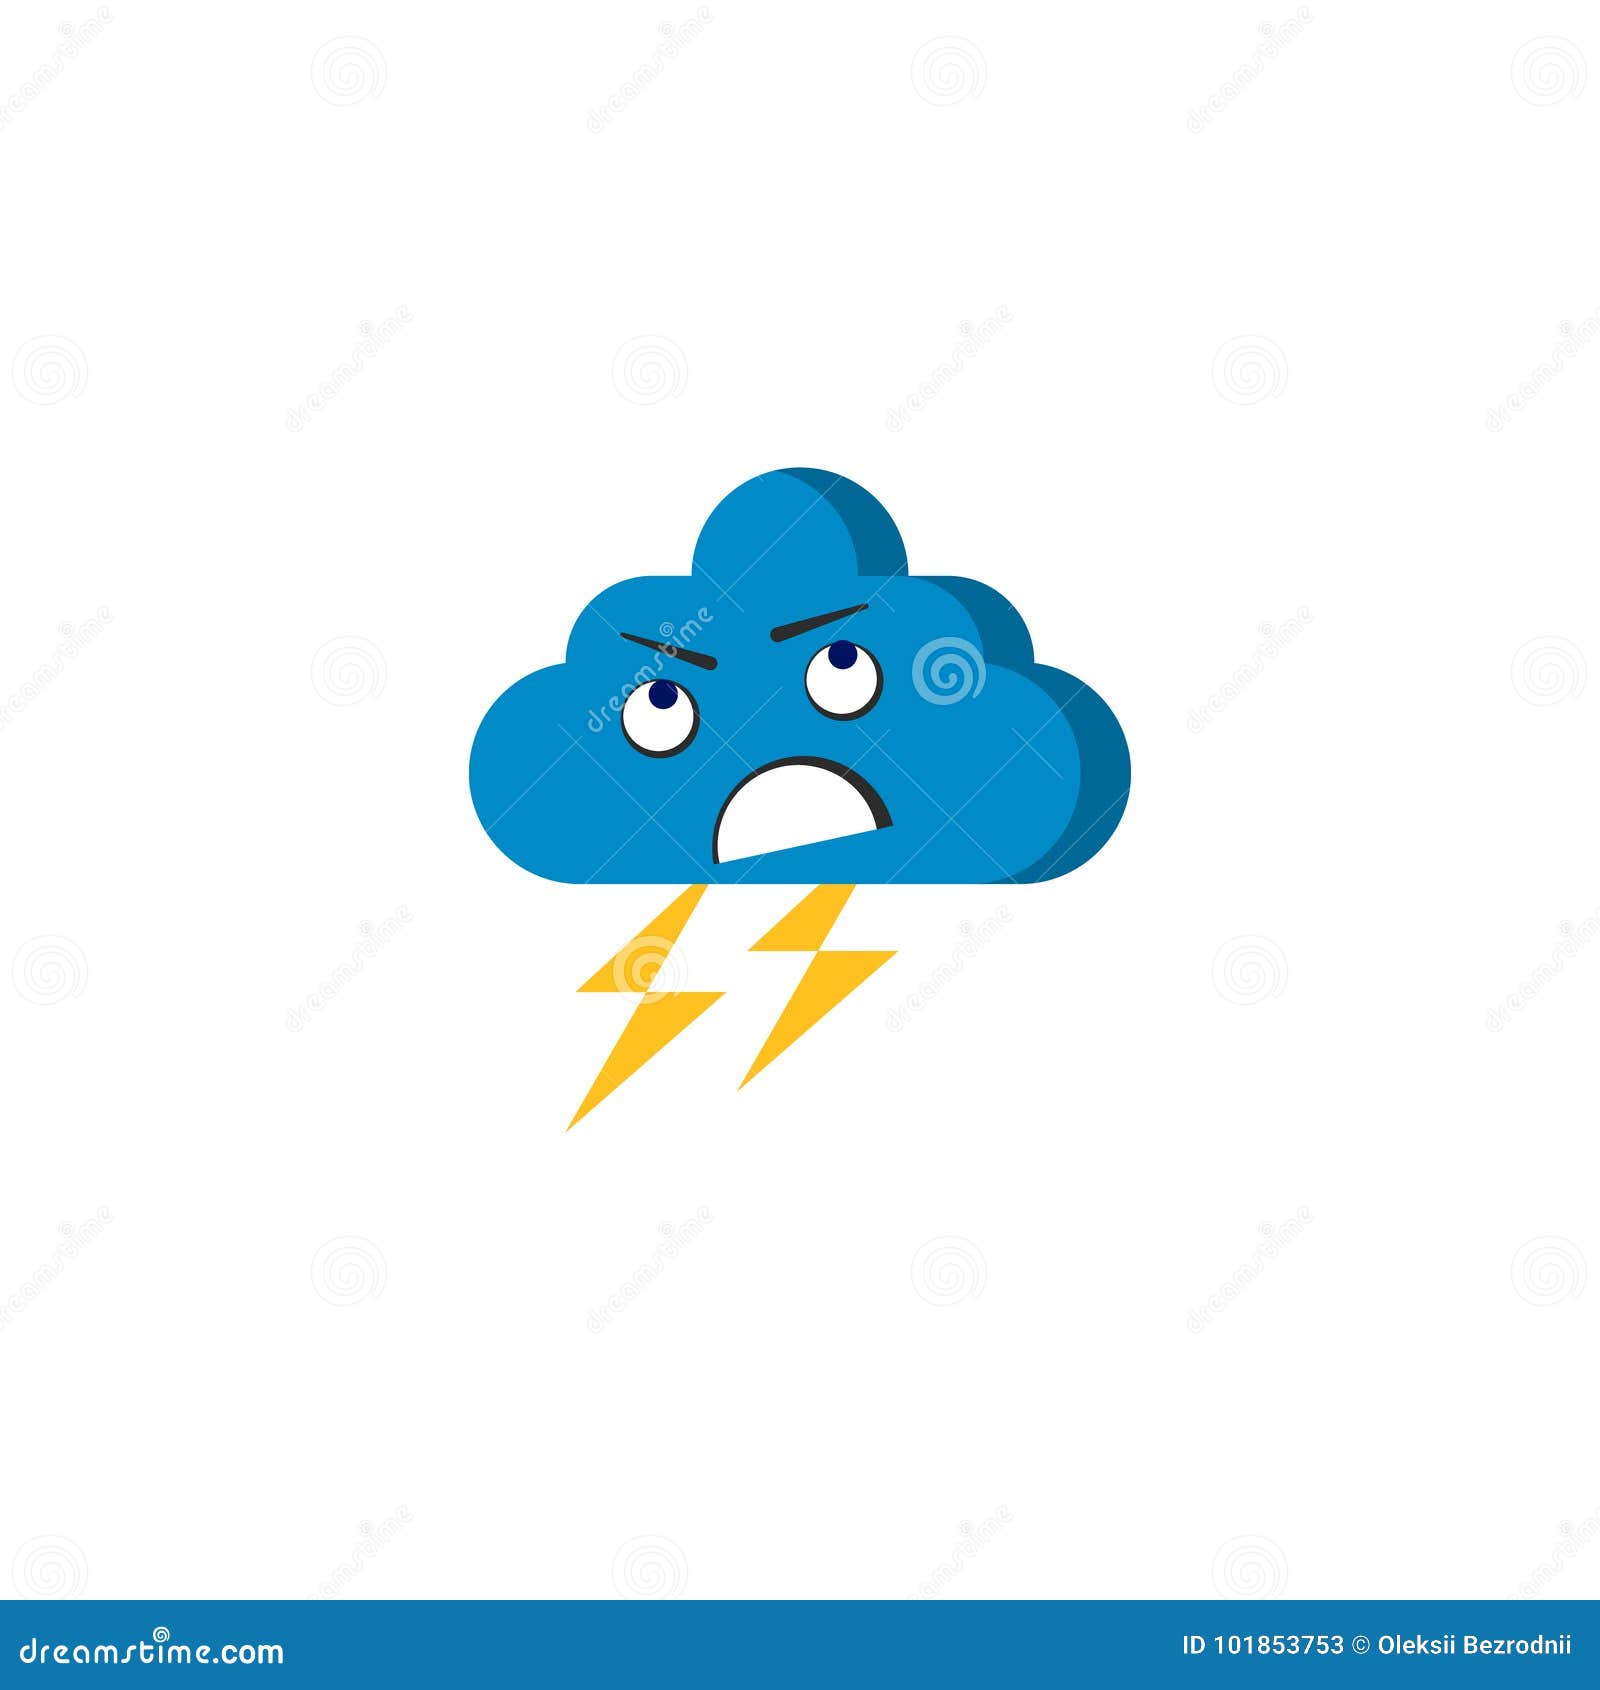 Angry storm cloud vector stock vector. Illustration of cloud - 101853753